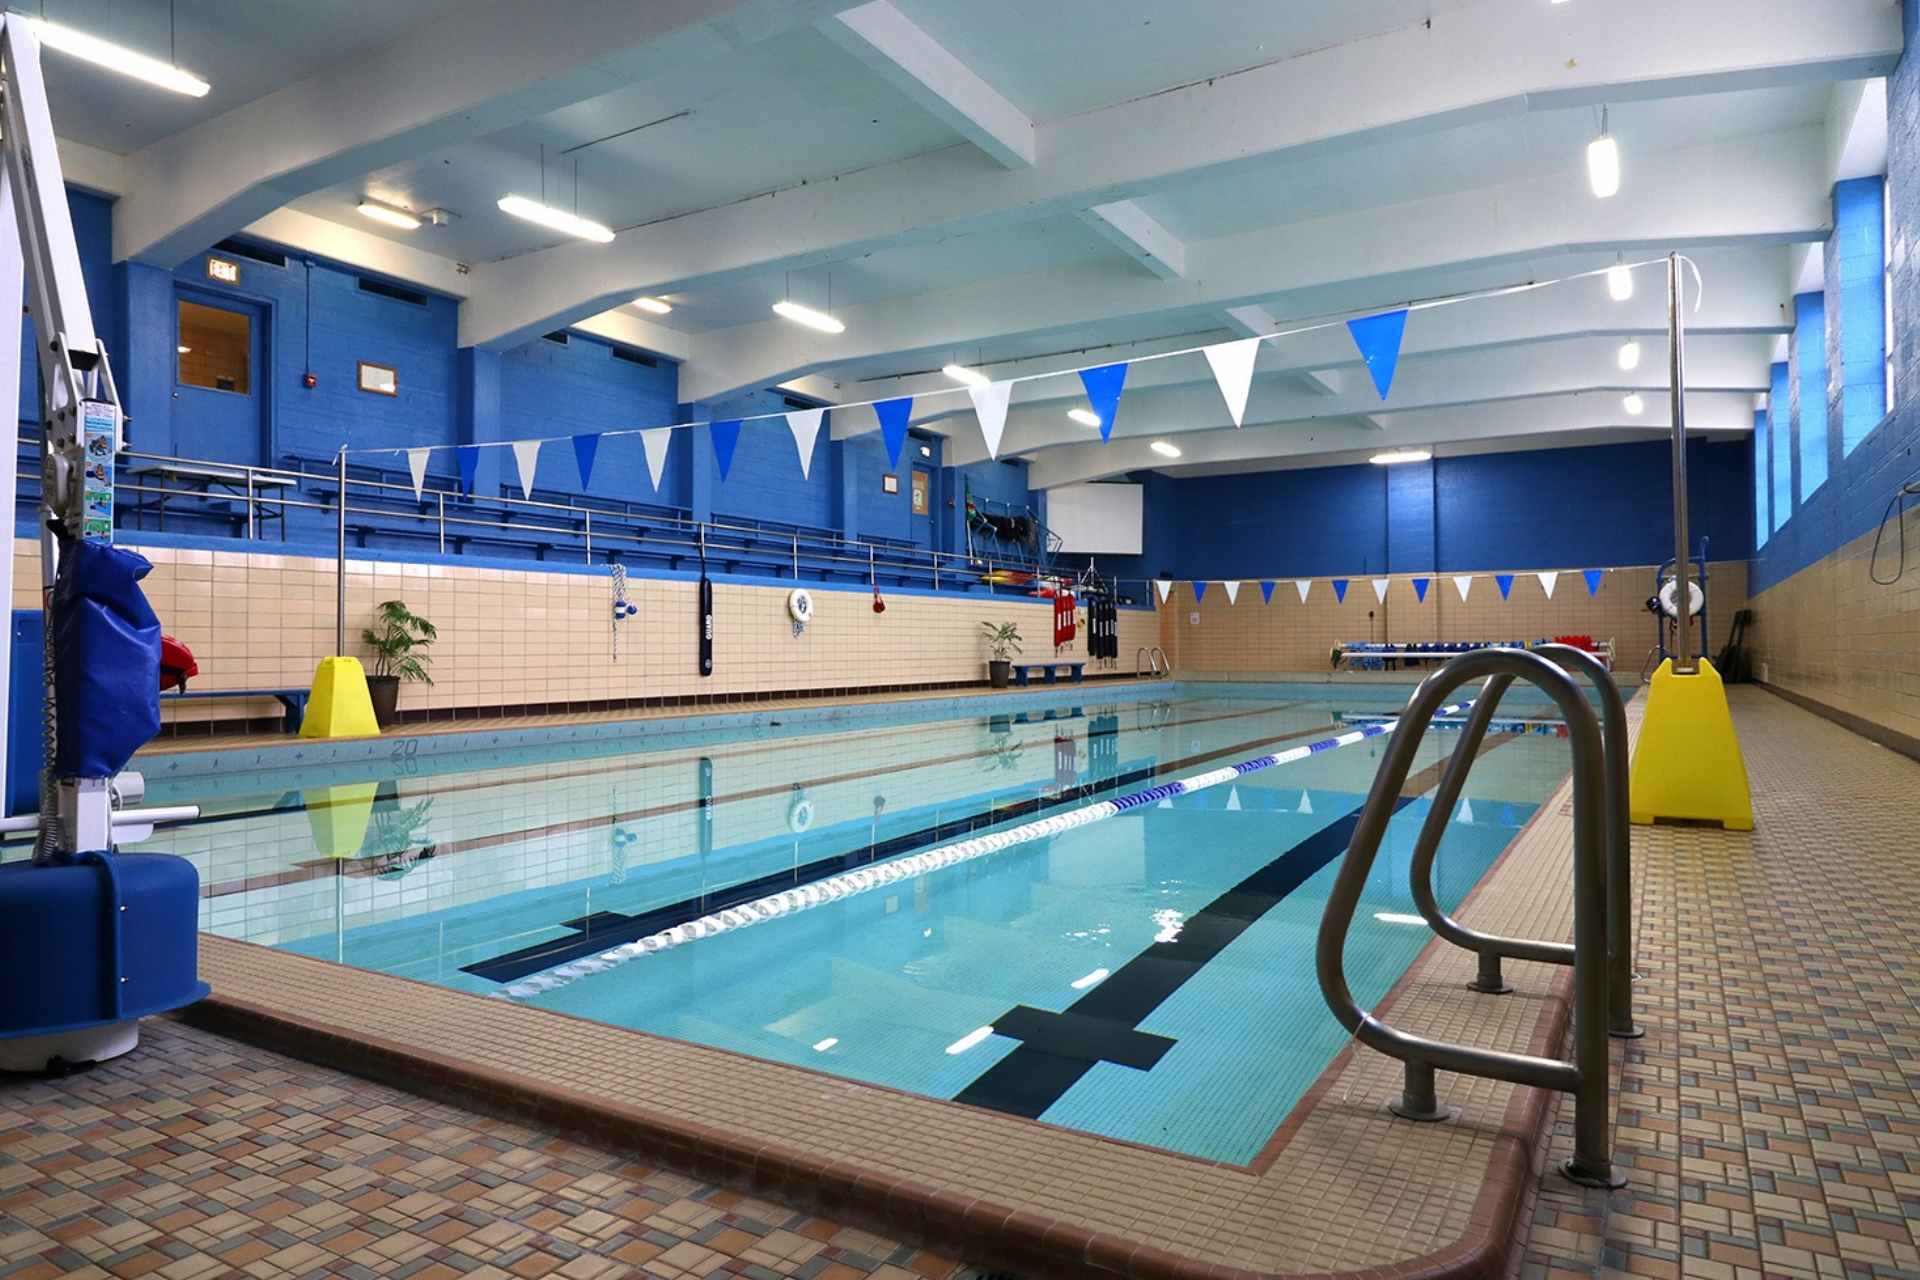 The Glenville State College Pool, pictured, will be the site of upcoming Red Cross lifeguard certification classes.